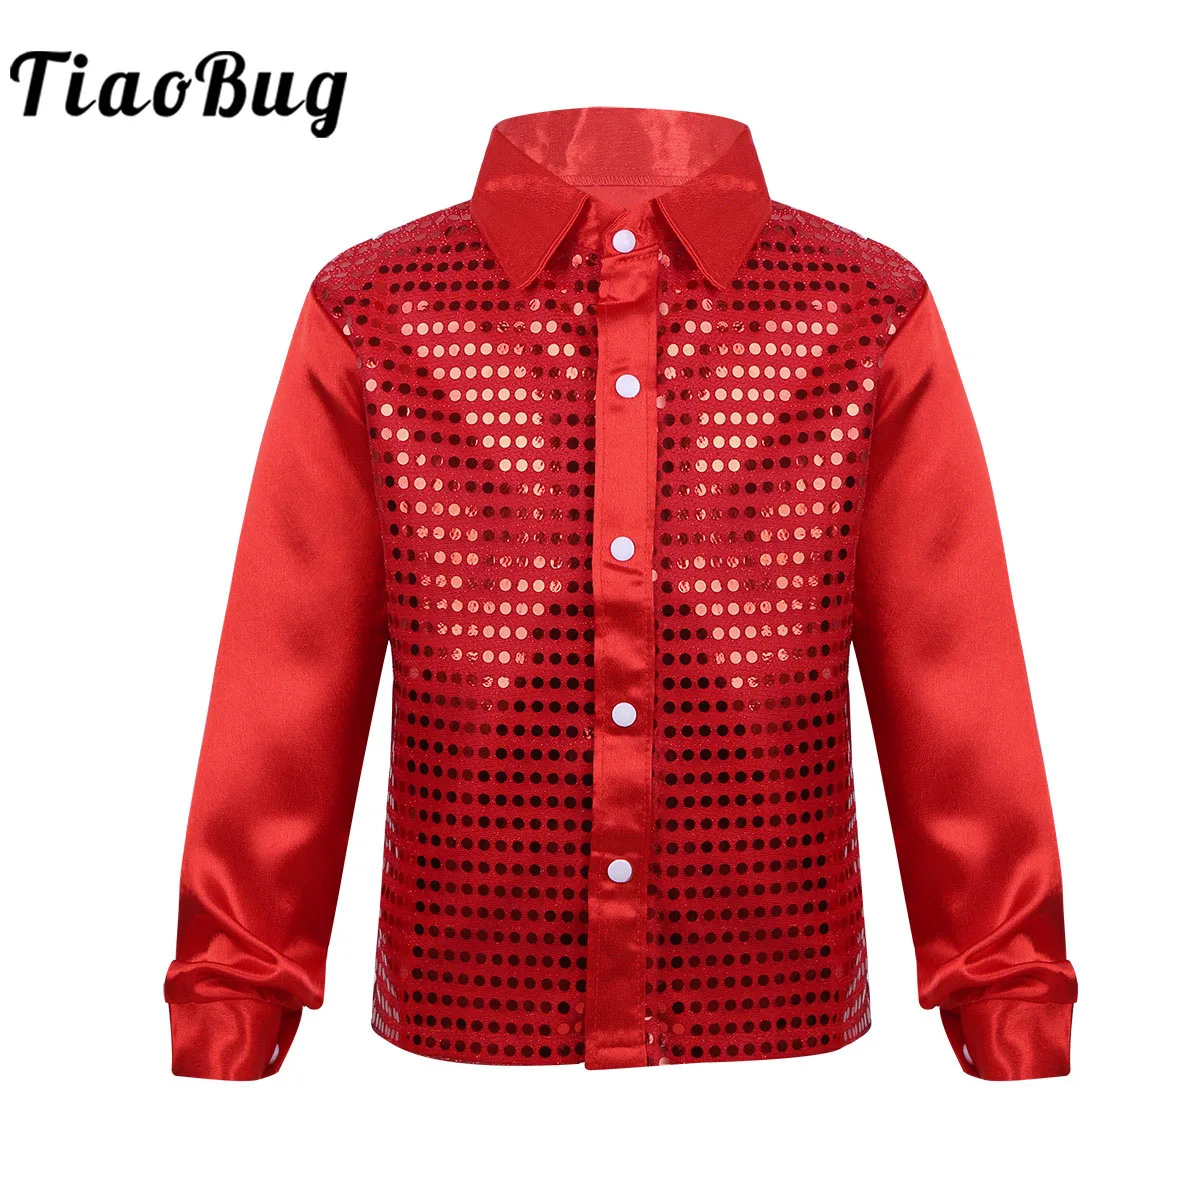 Boys Sequins Shirt Top Kids Long Sleeve Hip-hop Latin Jazz Dance Costumes Sparkle Stage Performance 70s Disco Party Costume